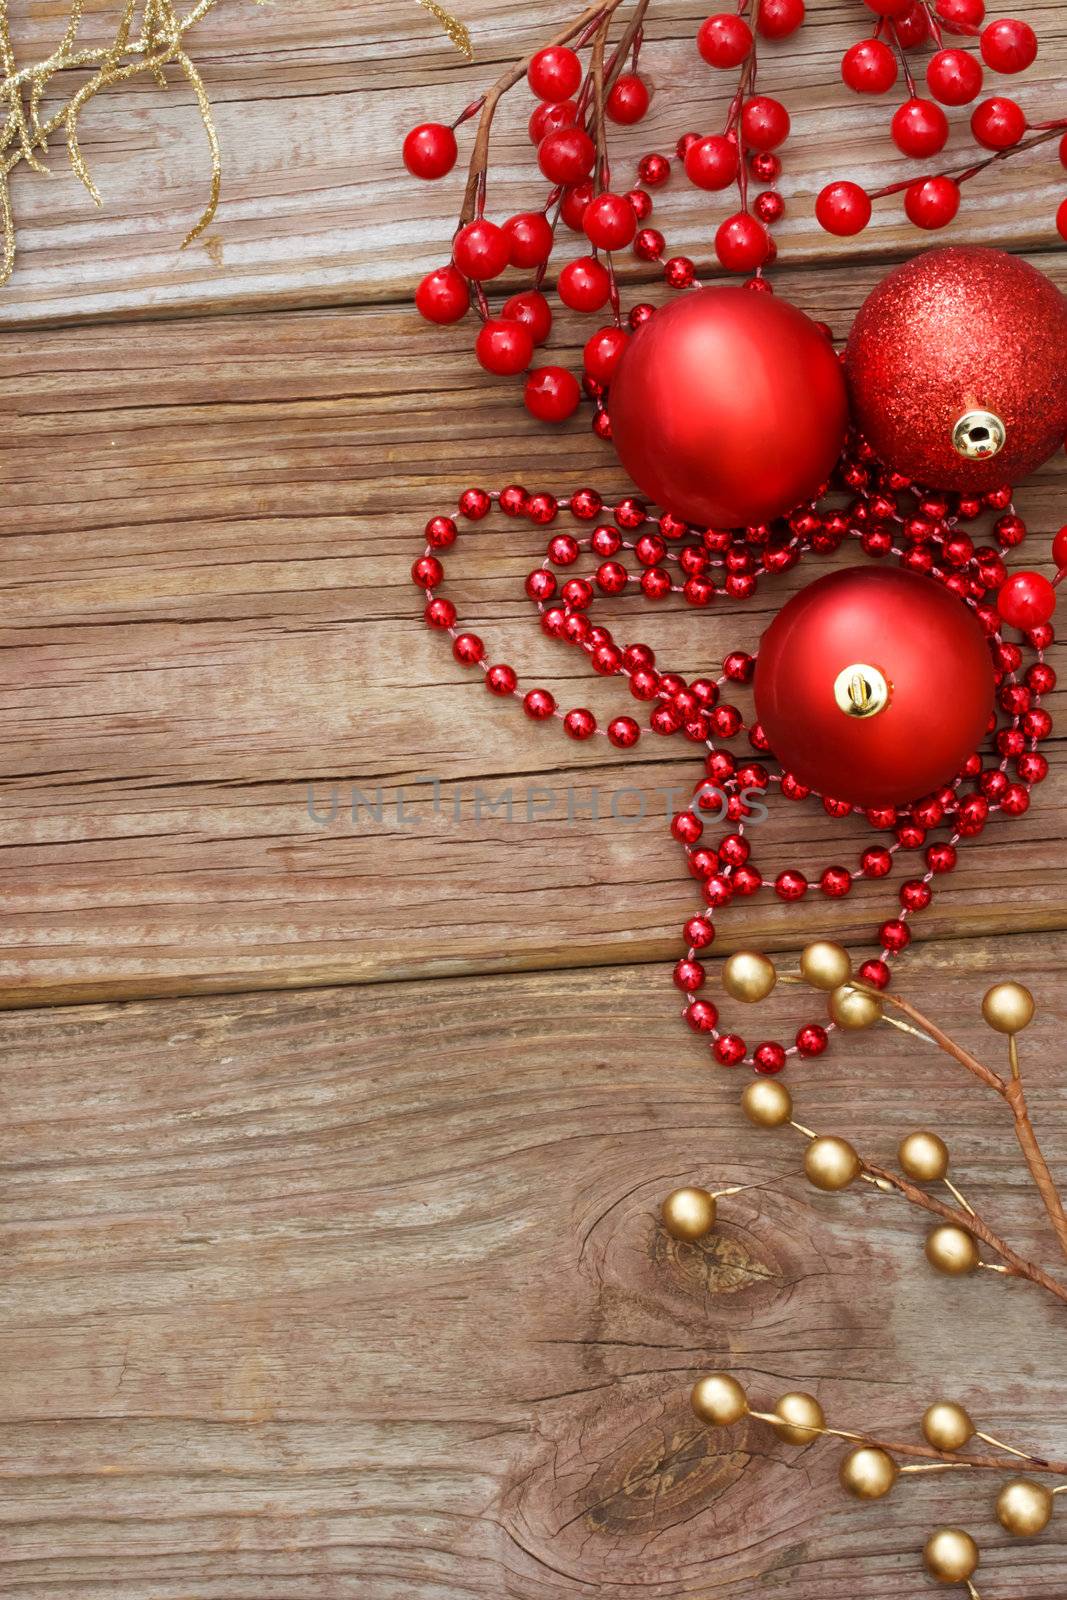 Red Christmas ornaments on wood